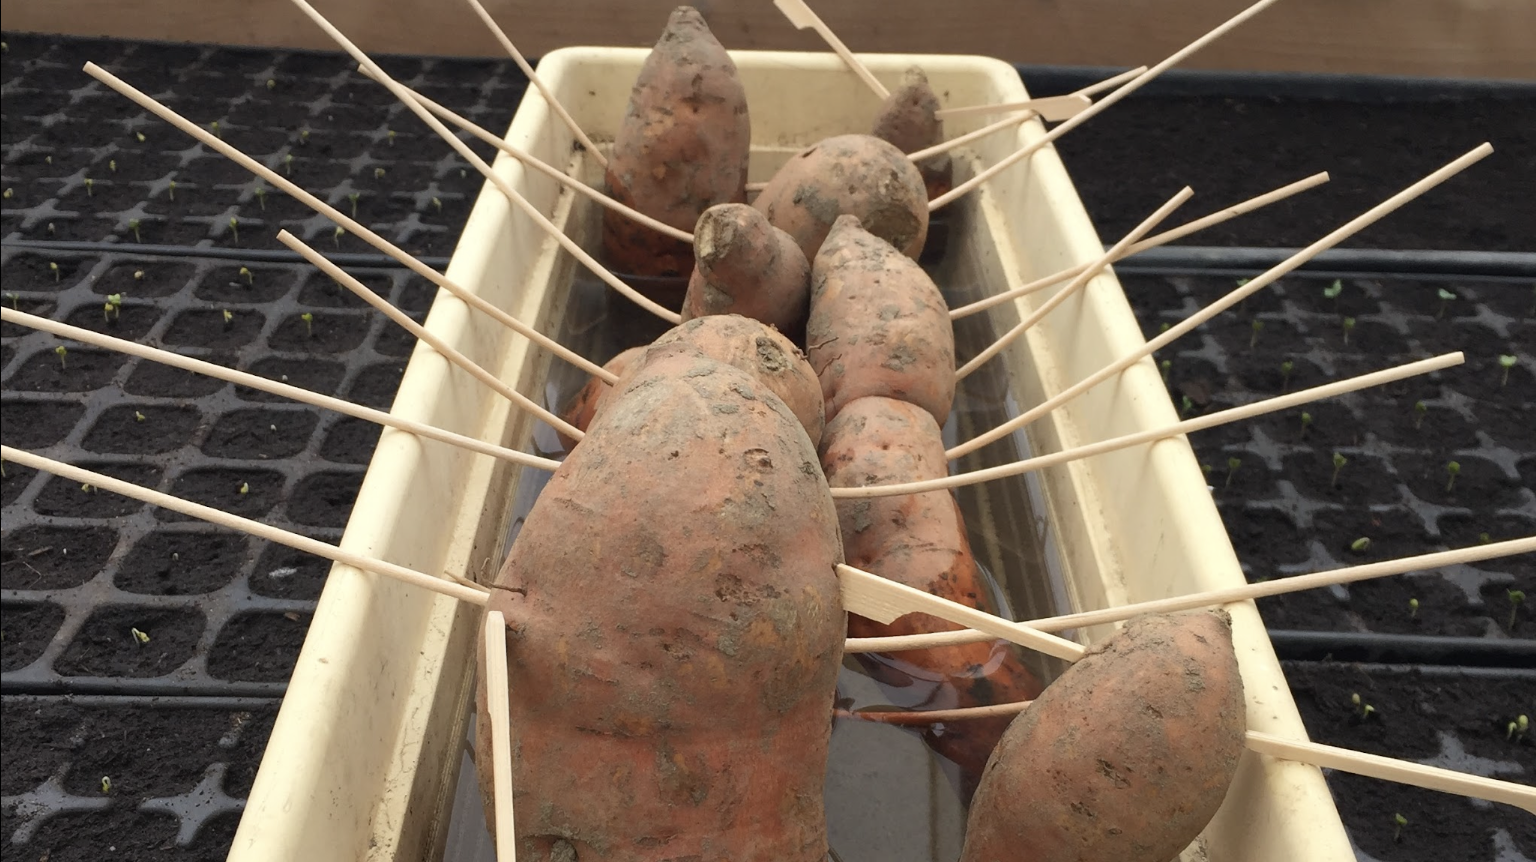 Grow your own sweet potato plants in water